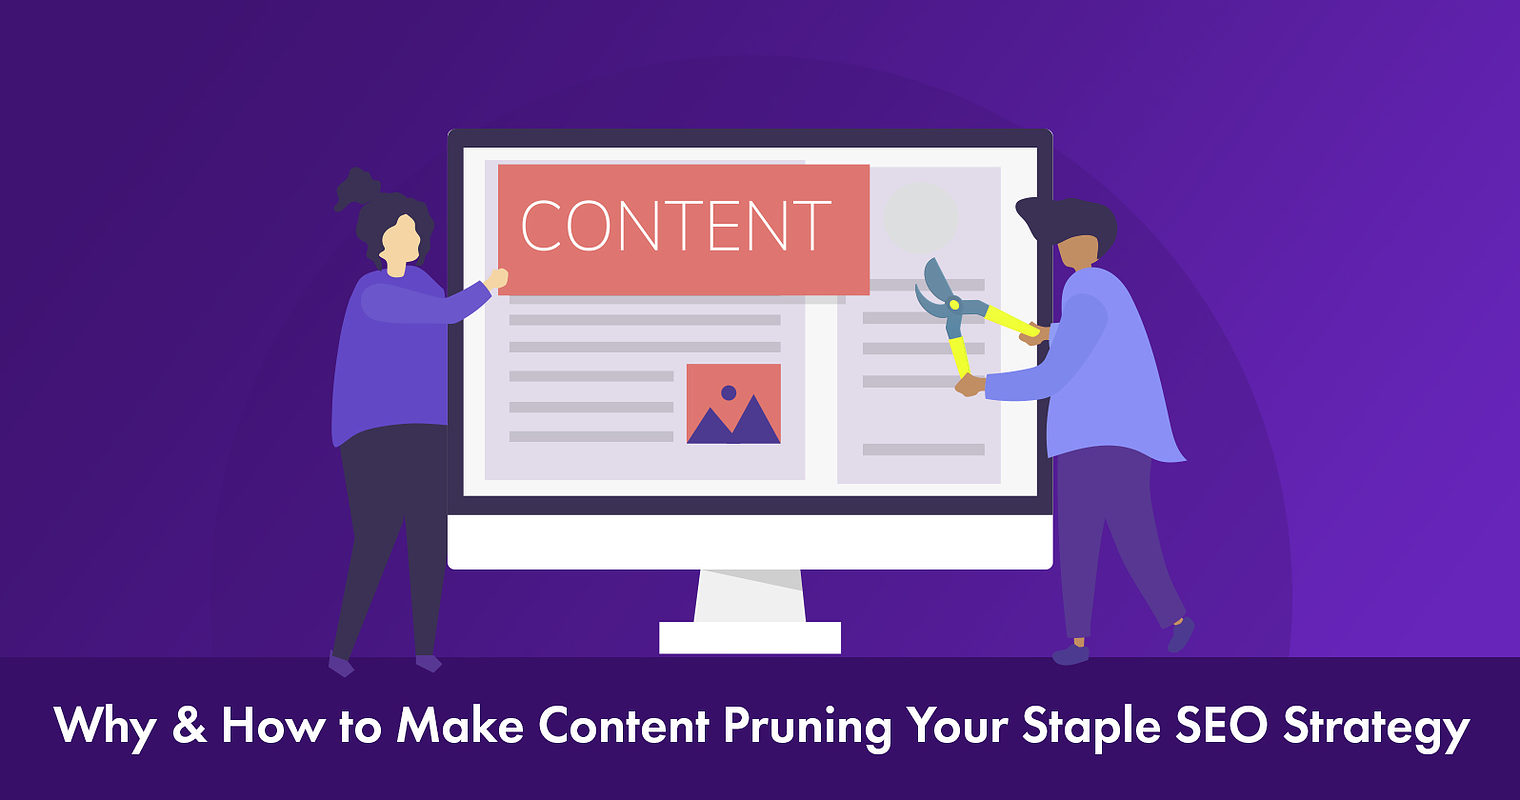 Why & How Content Pruning Helps Your SEO